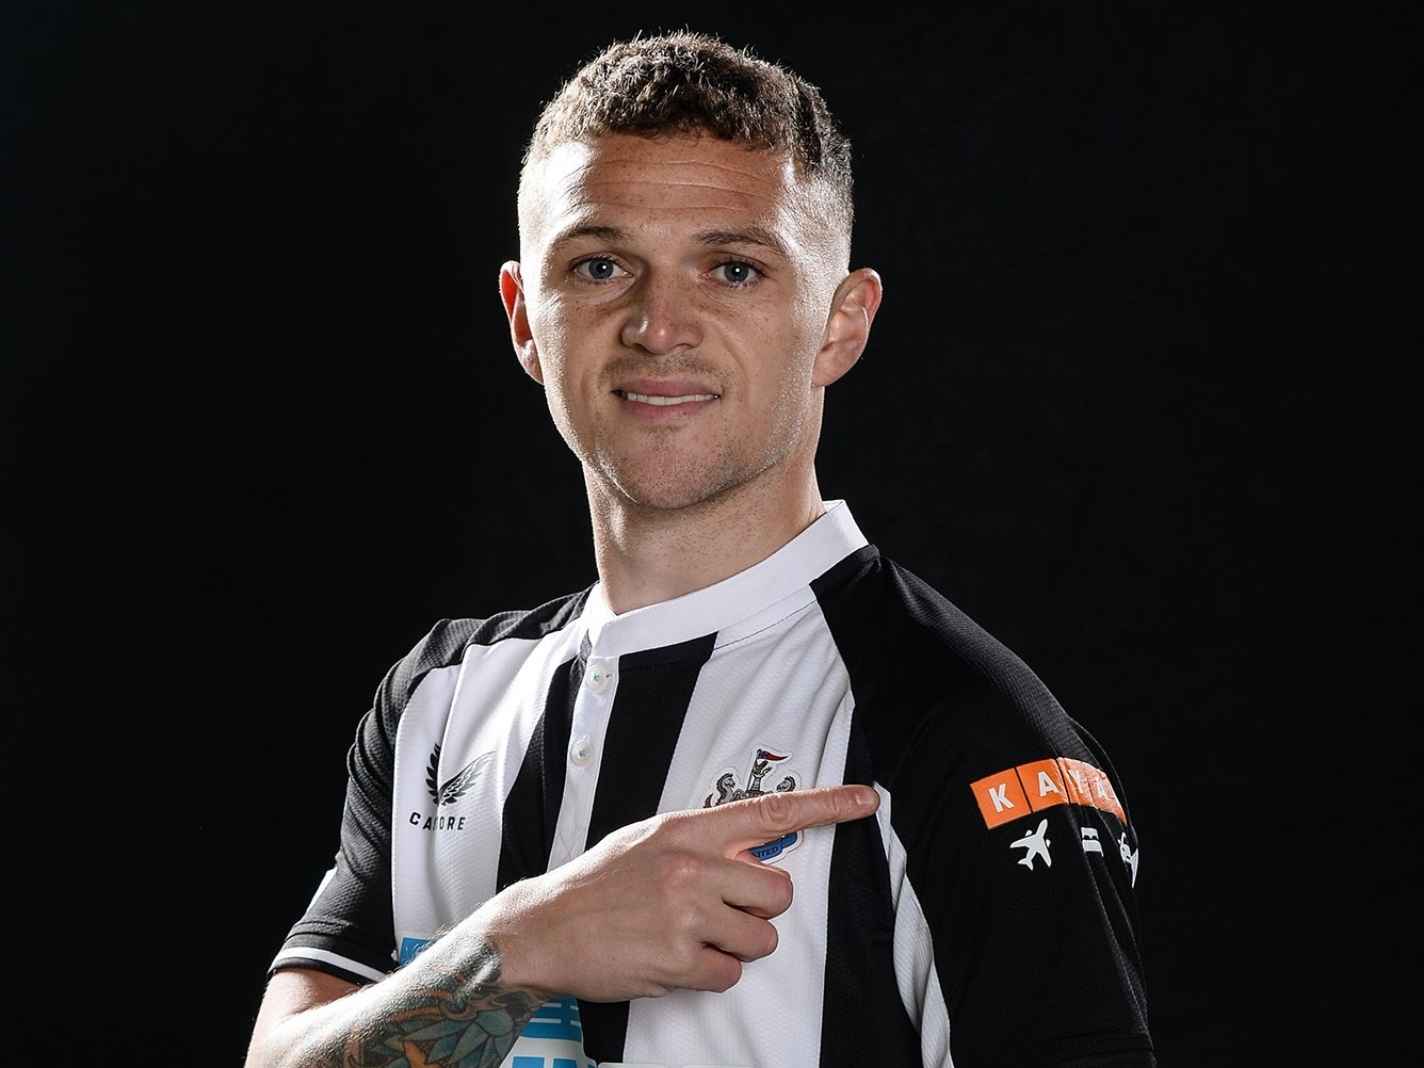 Twitter reacts as Kieran Trippier misses Newcastle badge and points at sleeve sponsor instead